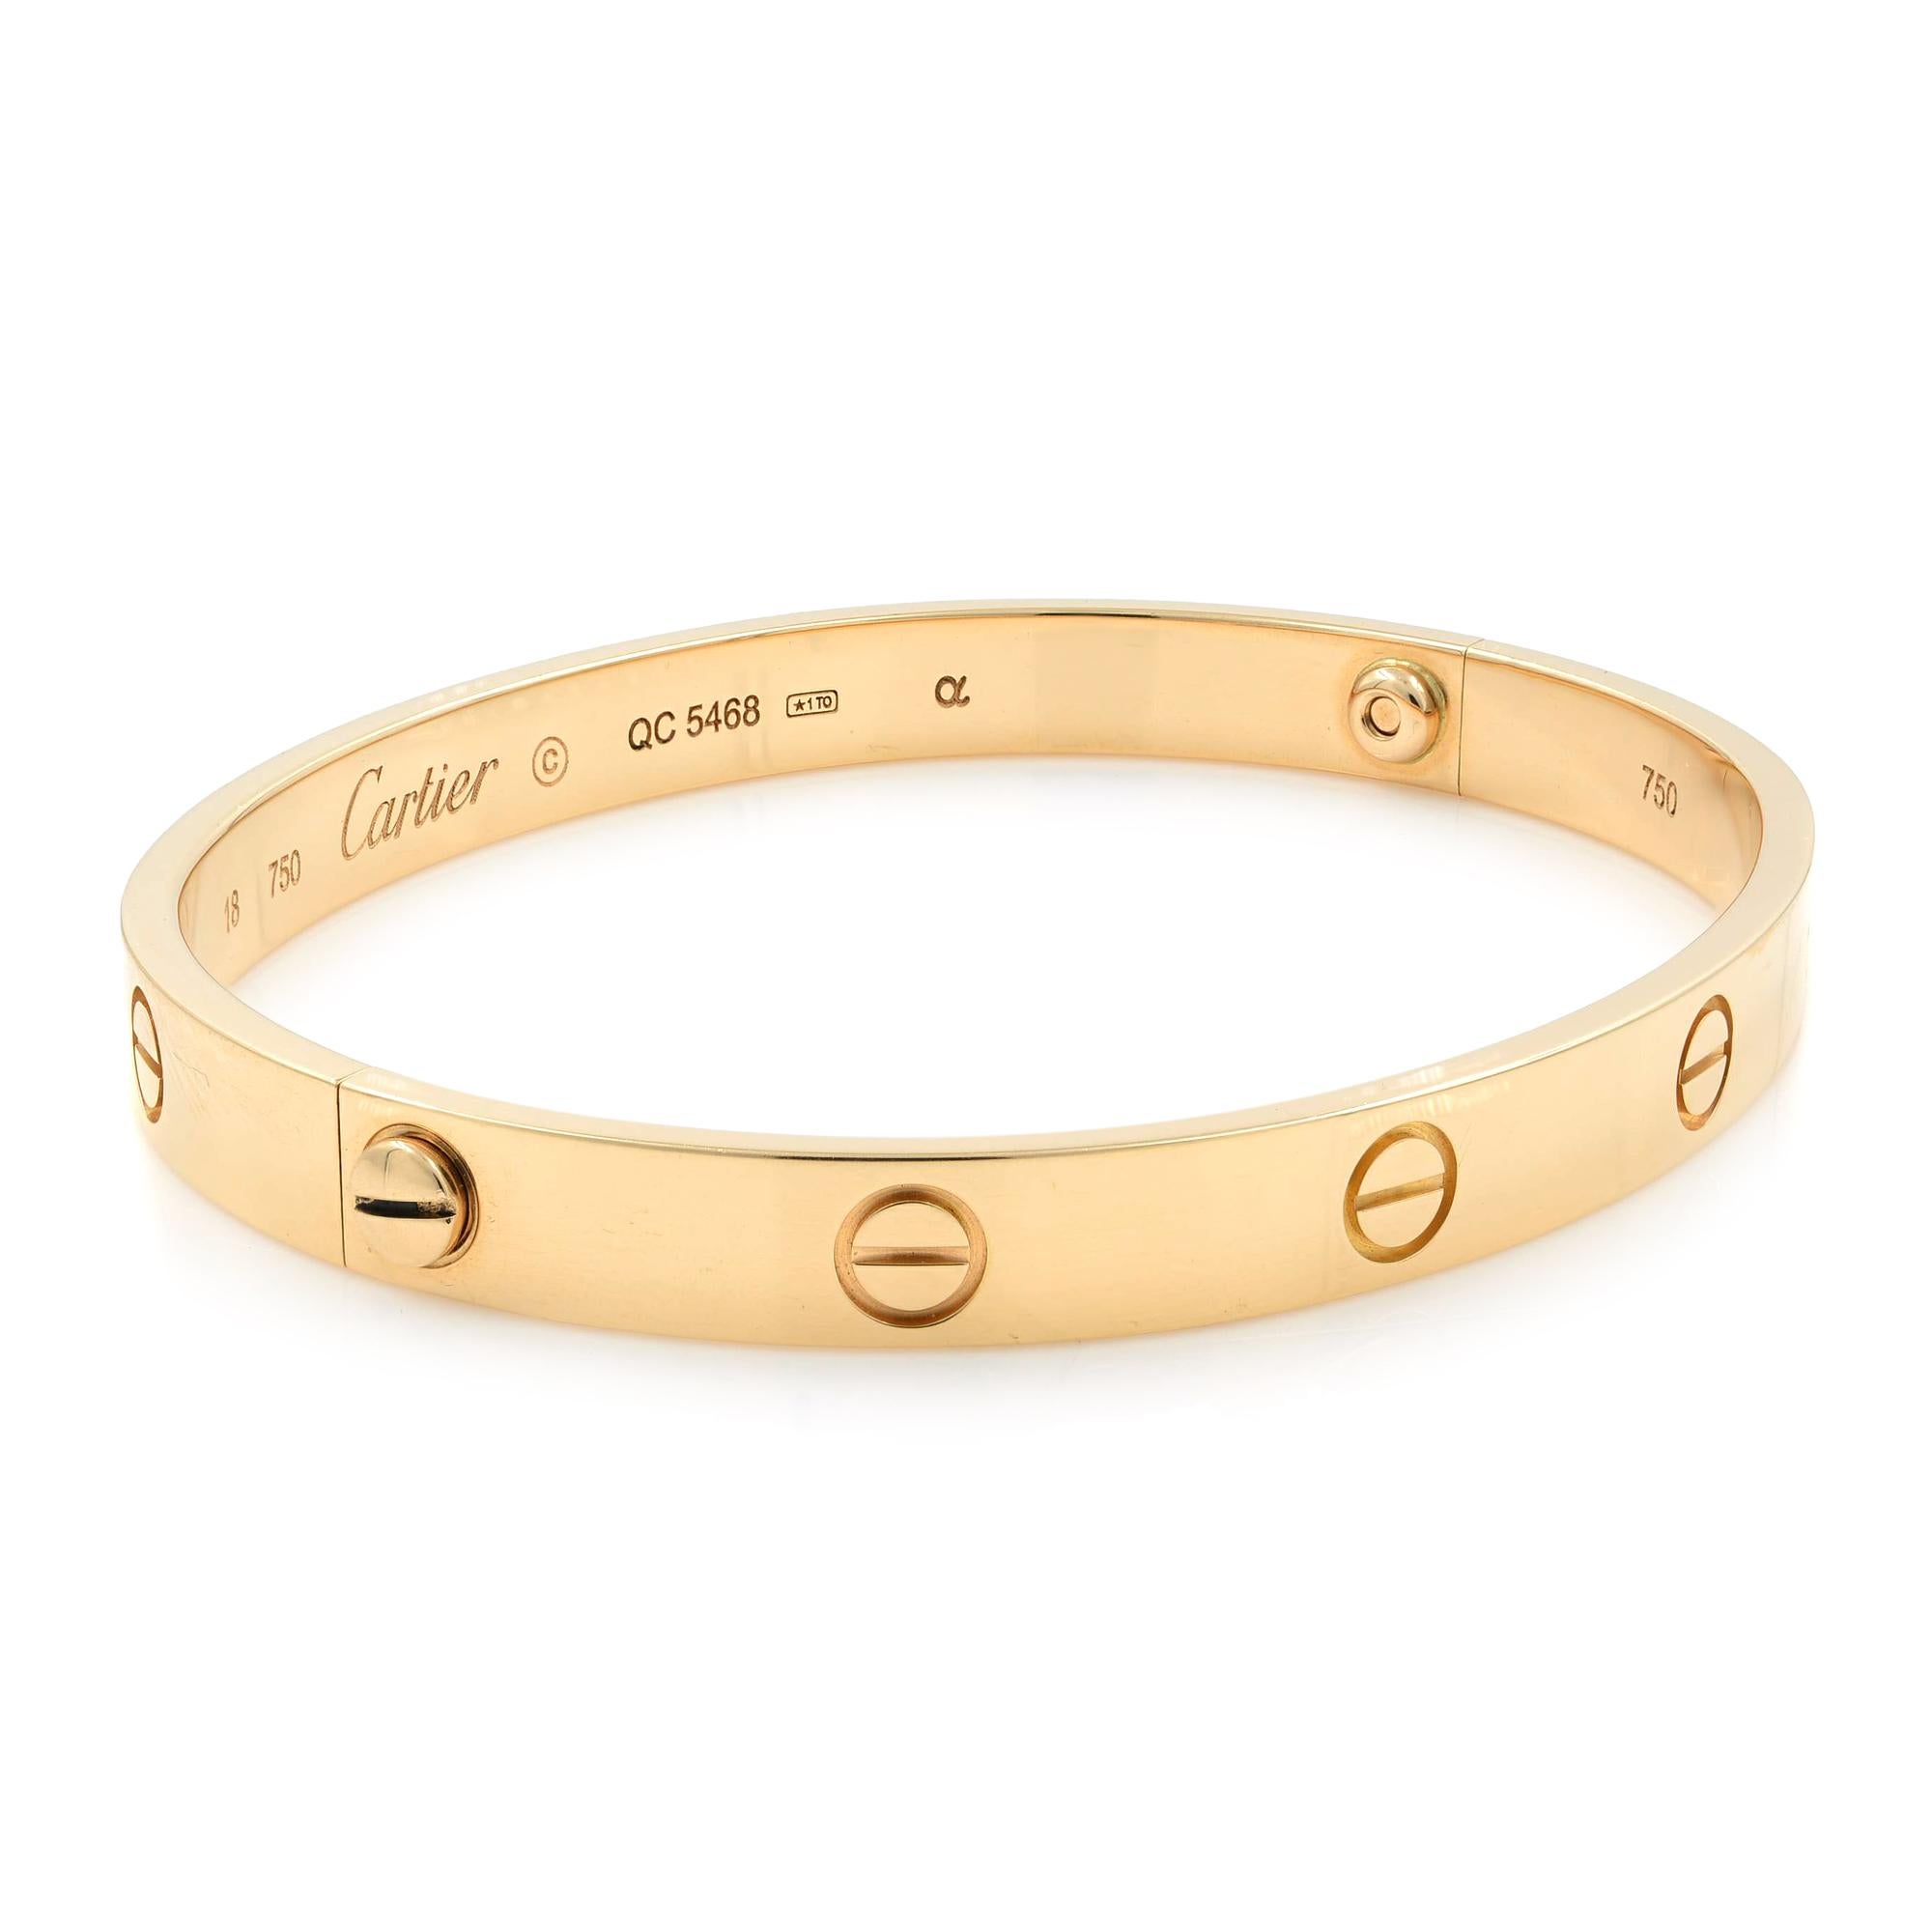 How far would you go for love? This is the question posed by Cartier with its now-iconic piece, the LOVE bracelet. Its appeal is multifaceted -- a cult item beloved by the fashion set, celebrity favorite and classic piece with instant recognition,